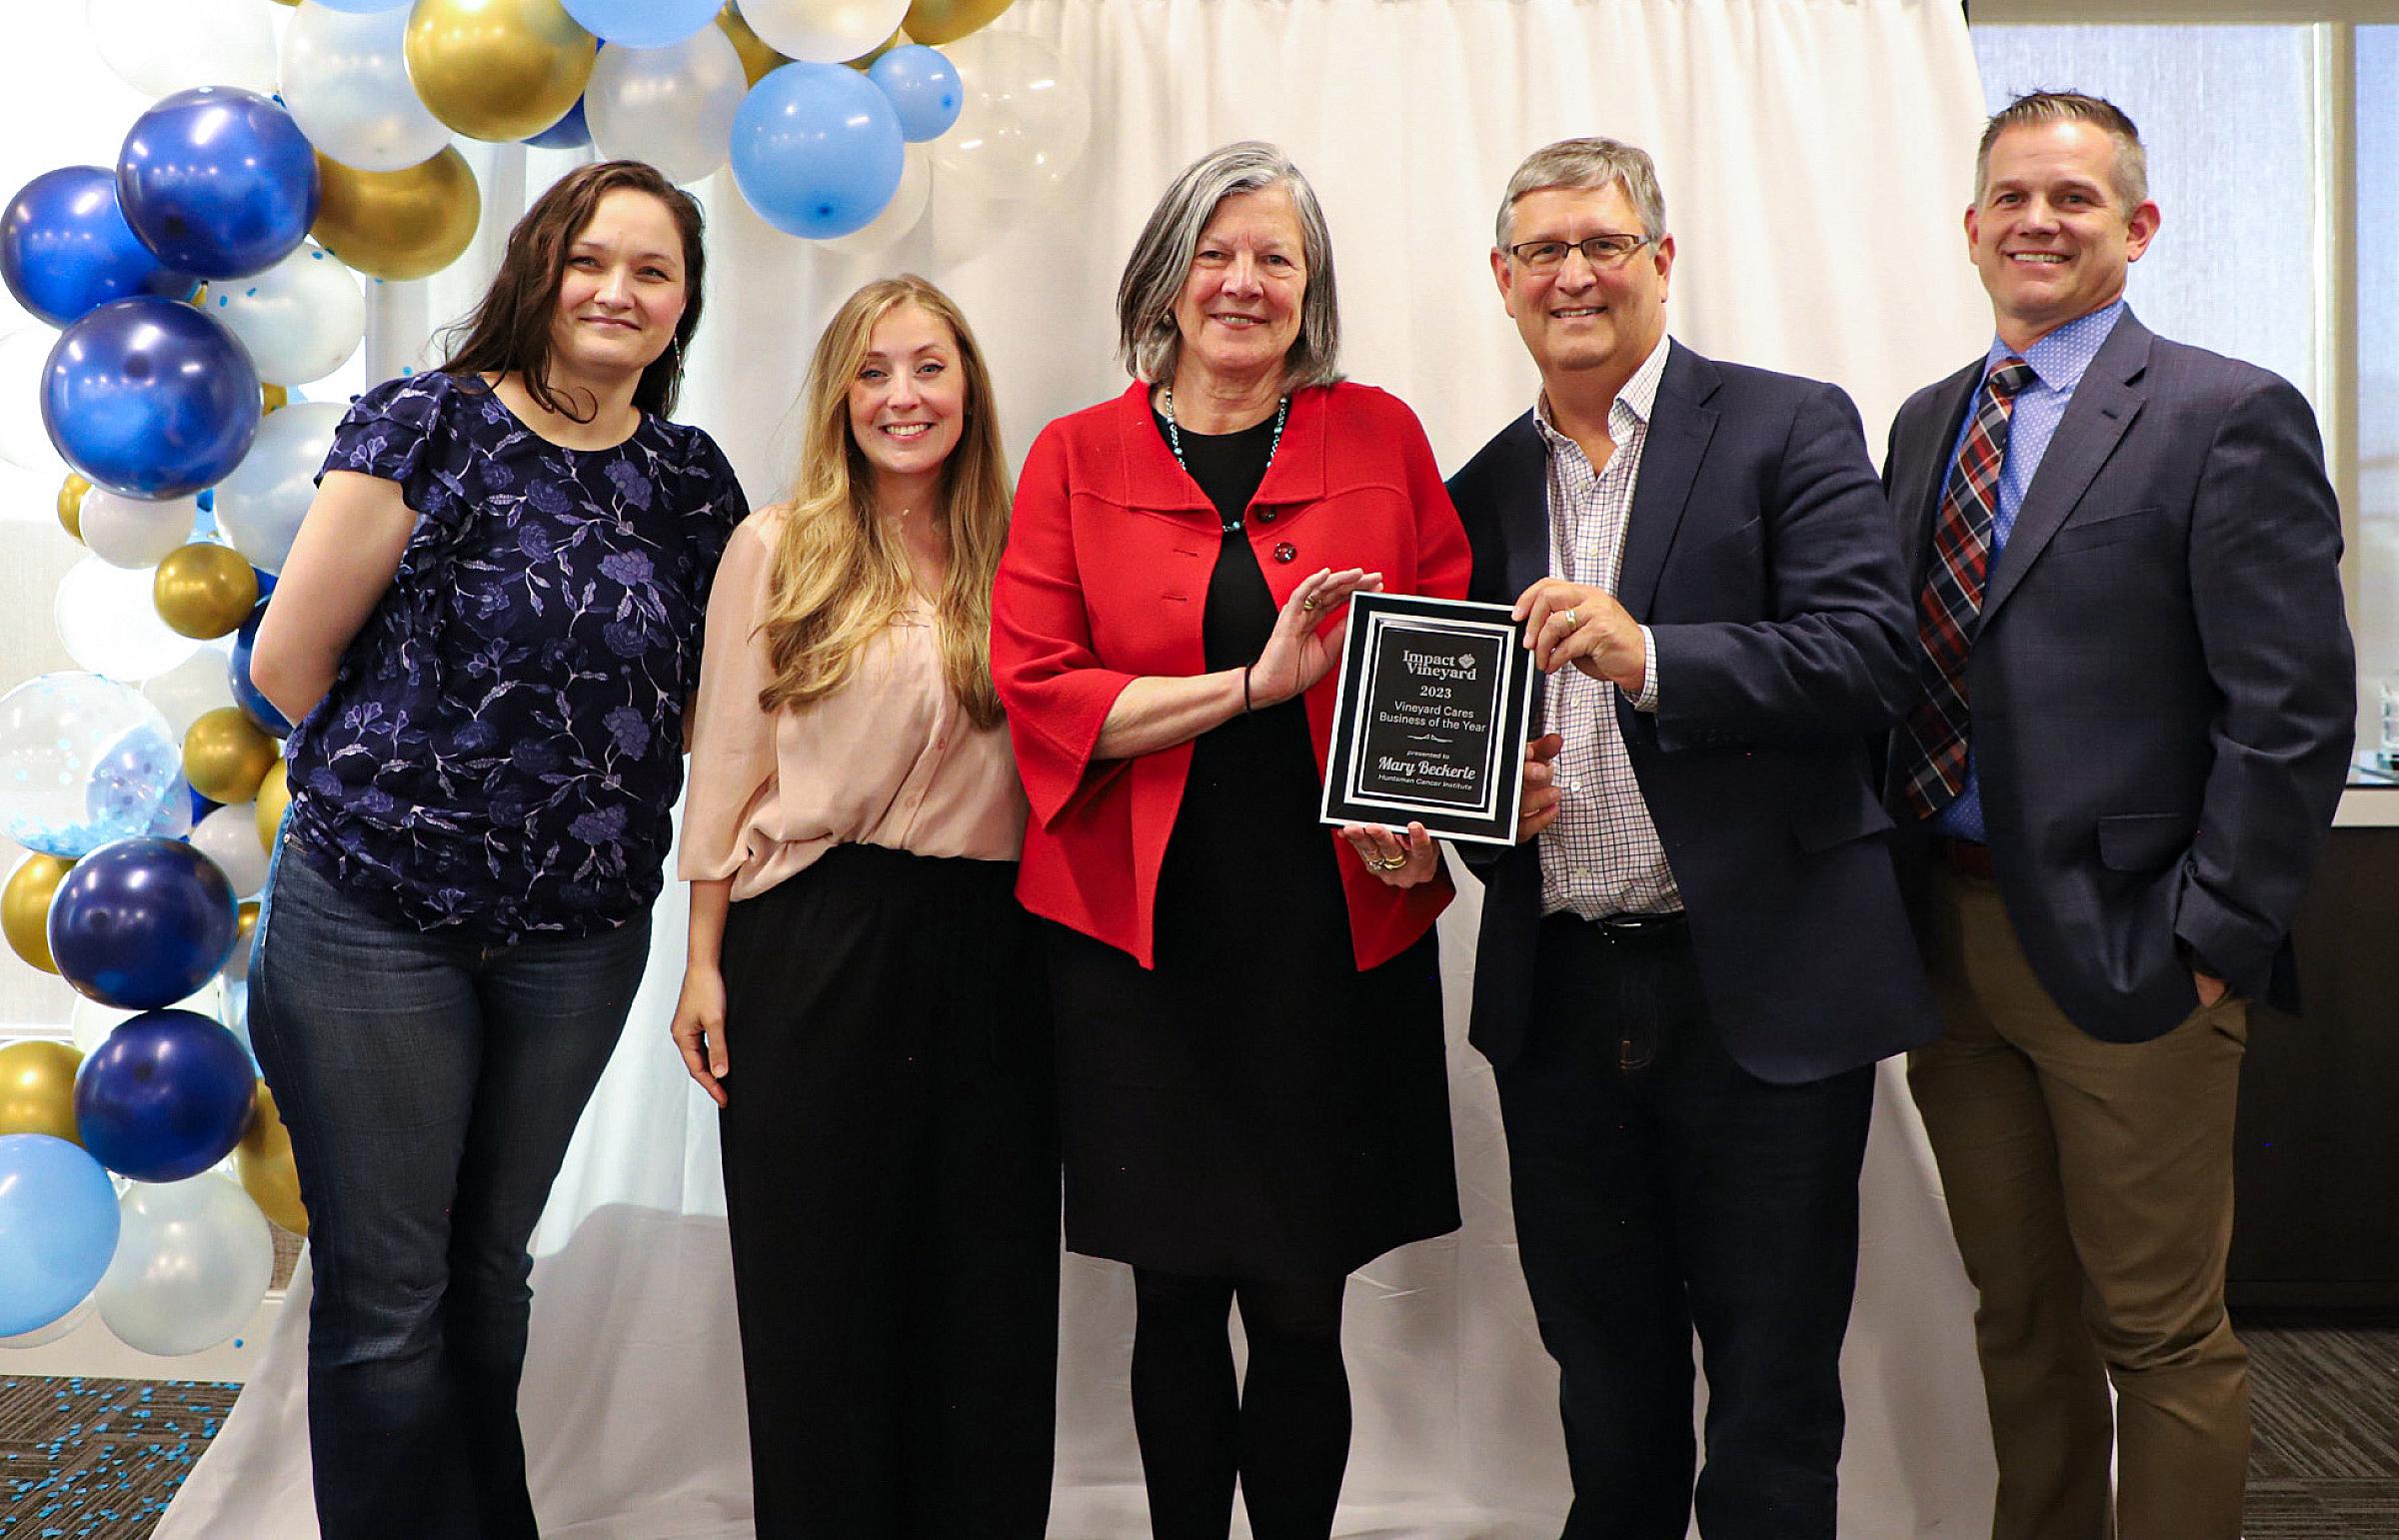 Mary Beckerle, PhD, and Brad Cairns, PhD, stand with Vineyard Mayor Julie Fullmer and other Vineyard officials as Huntsman Cancer Institute is presented the Business of the Year Award